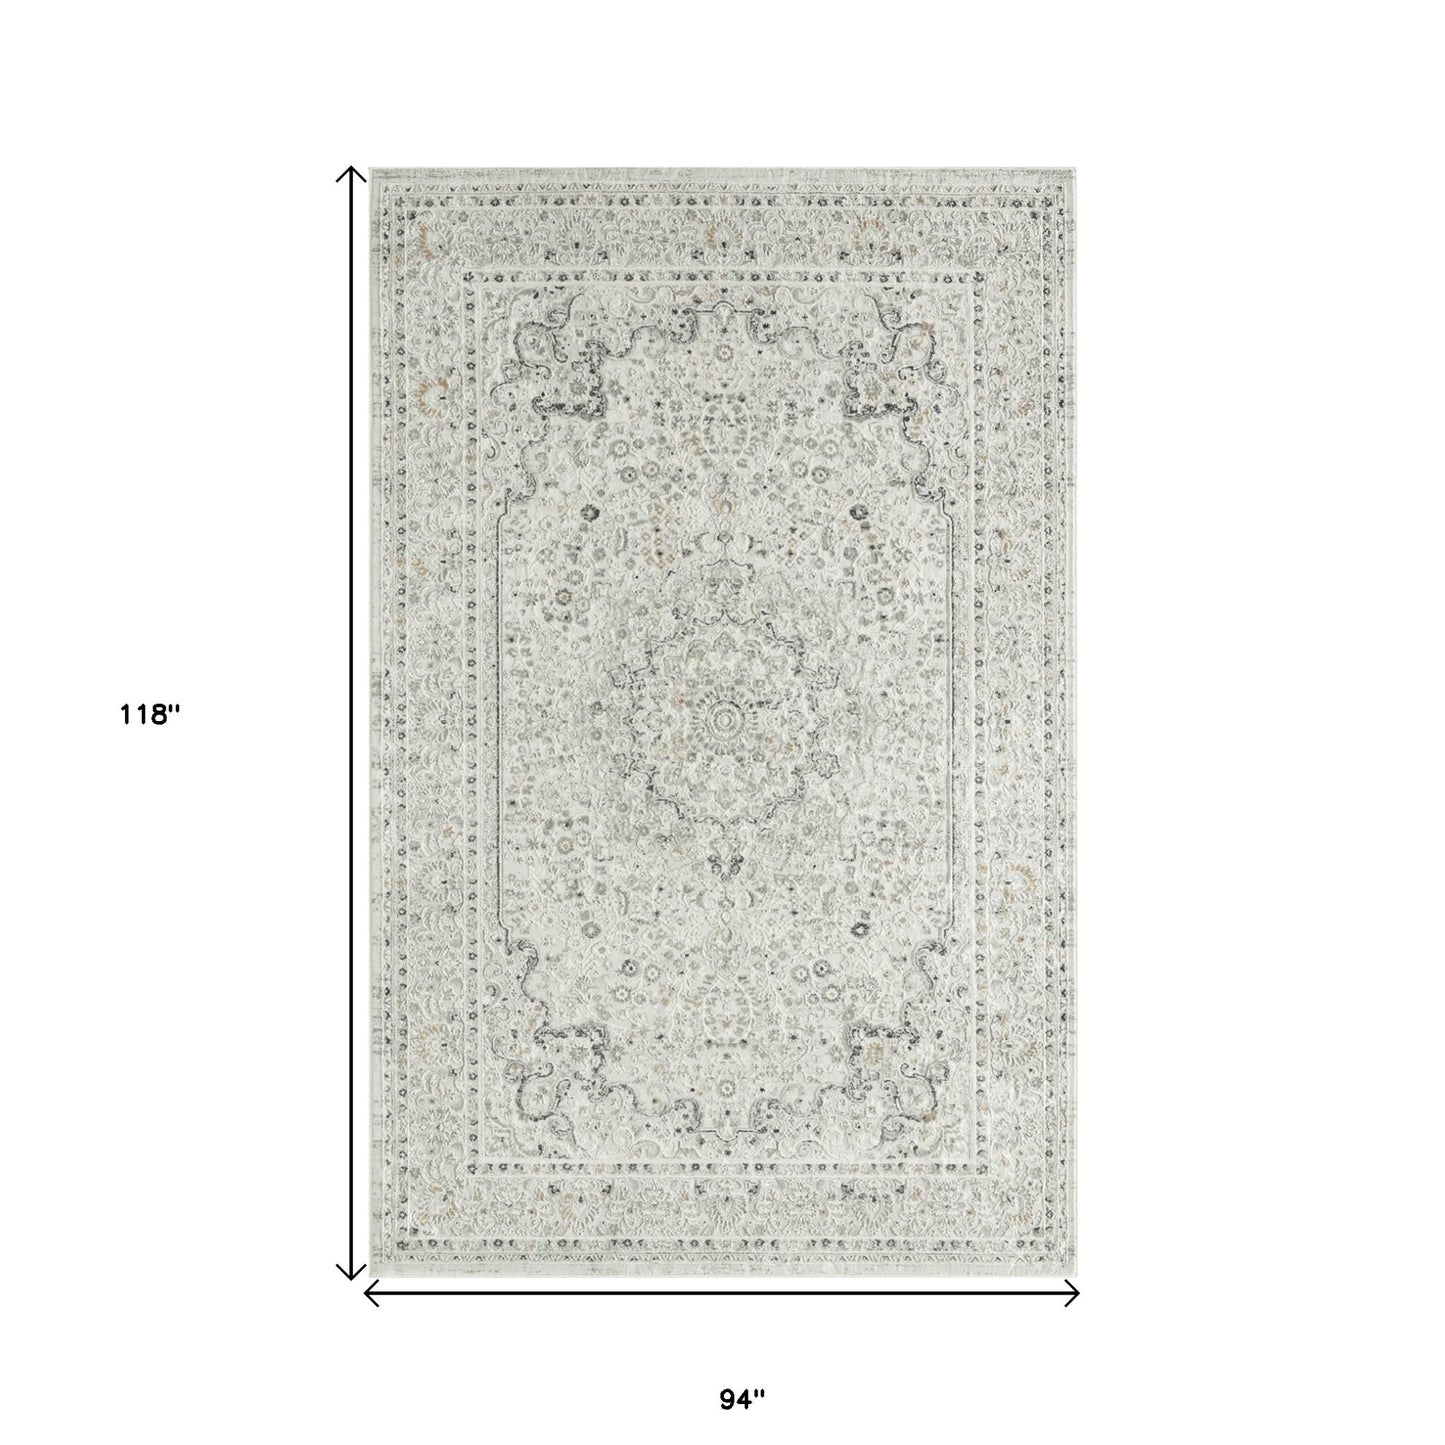 8' X 10' Ivory Gray And Taupe Floral Power Loom Stain Resistant Area Rug